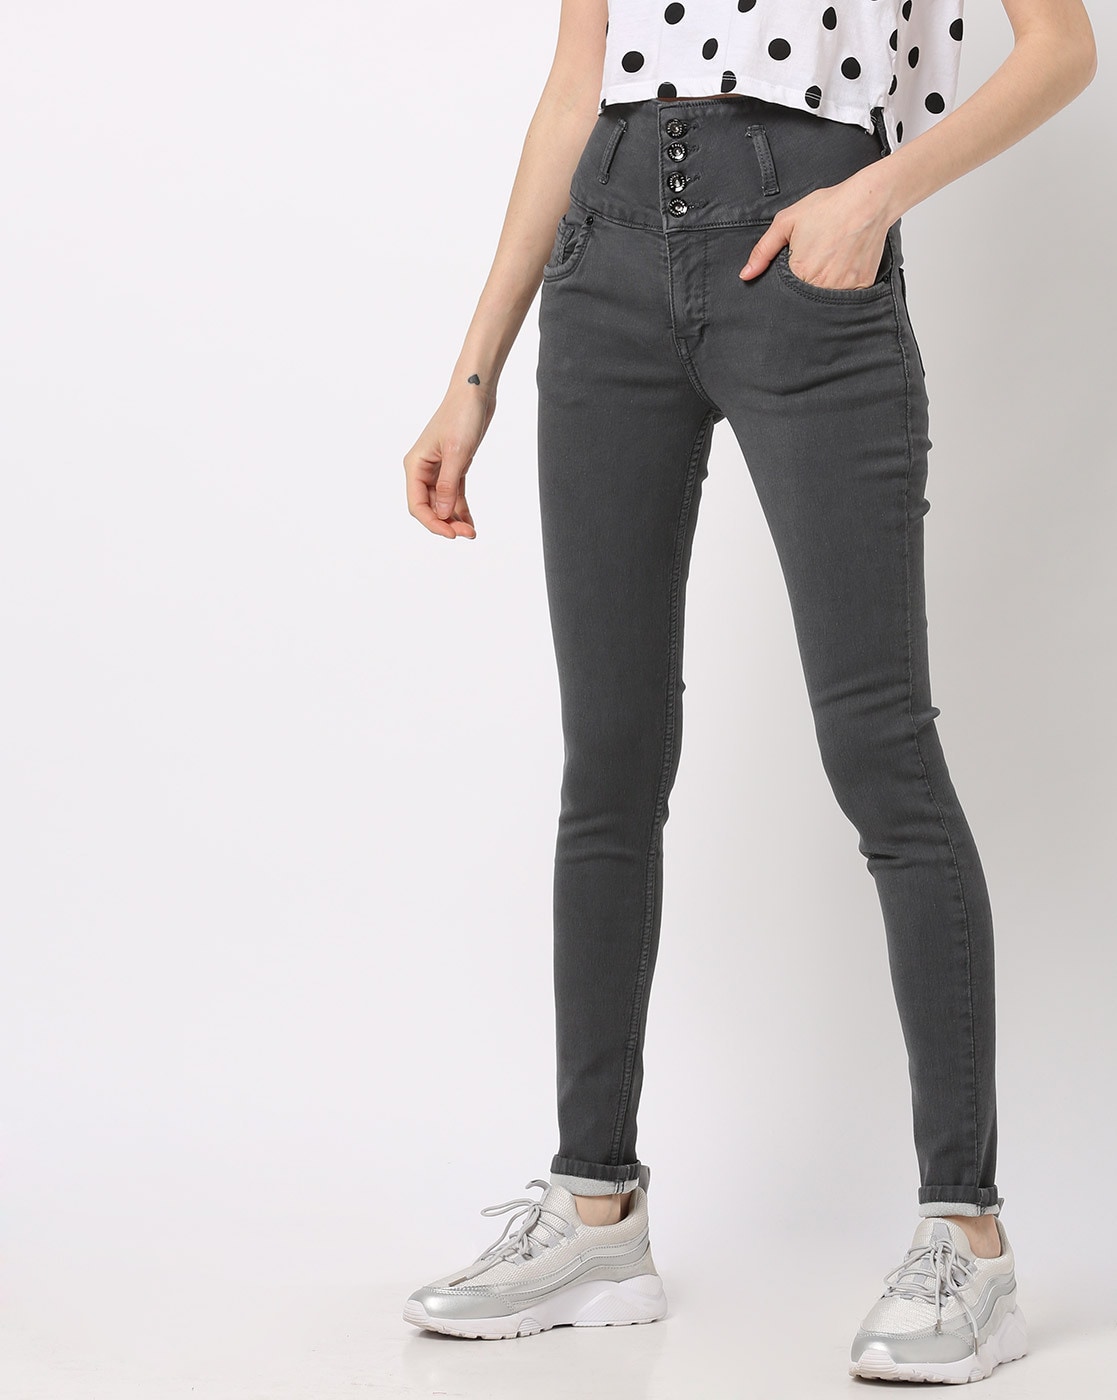 charcoal grey jeans womens